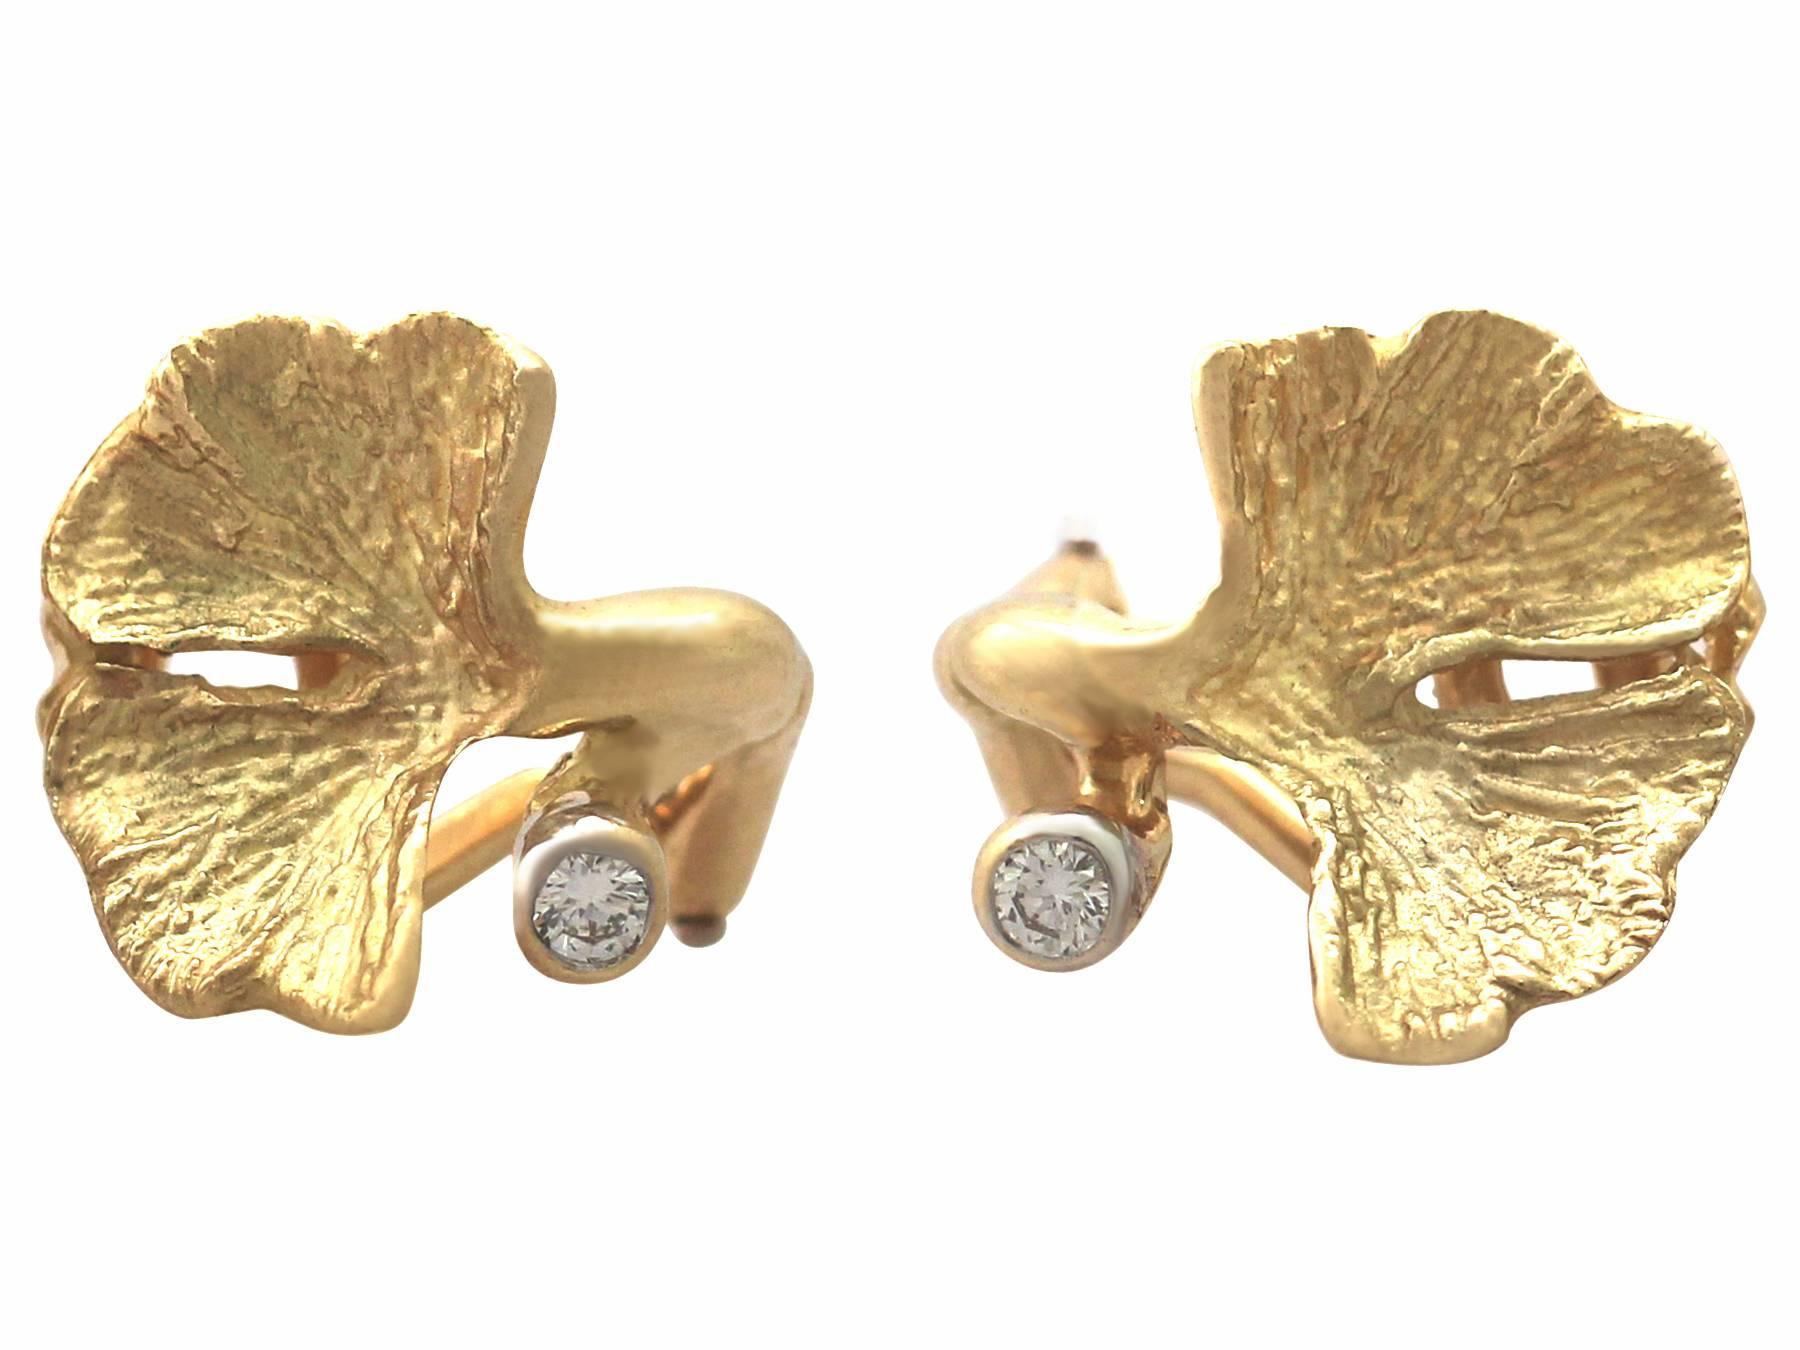 A fine and impressive pair of vintage Belgian 0.04 carat diamond and 18 karat yellow gold clip on earrings; part of our diverse vintage jewelry and estate jewelry collections

These fine and impressive vintage diamond earrings have been crafted in